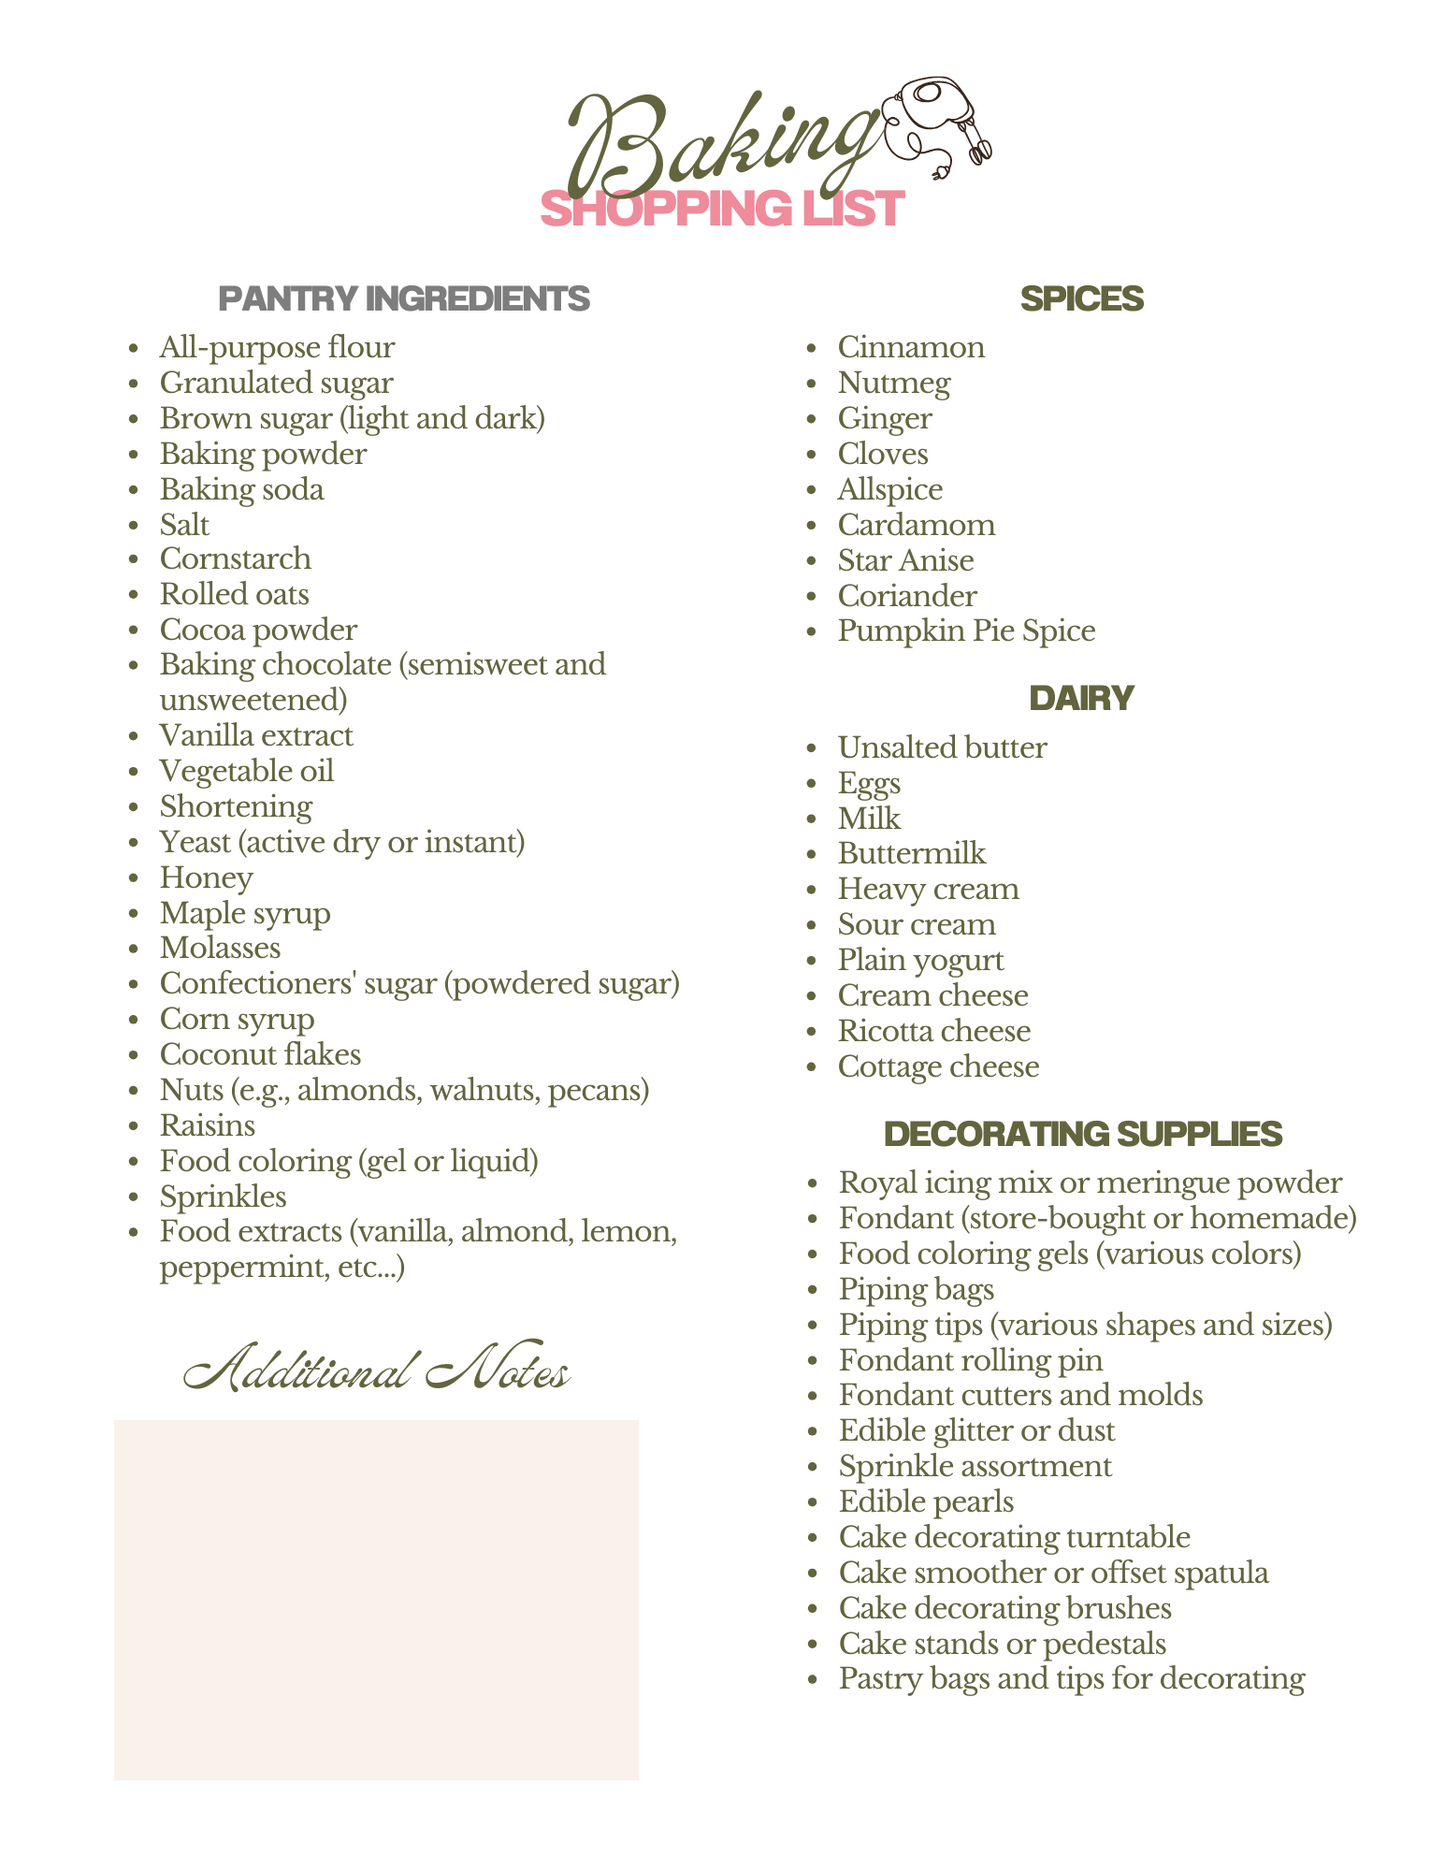 Everything Baking Planner for Home Bakers